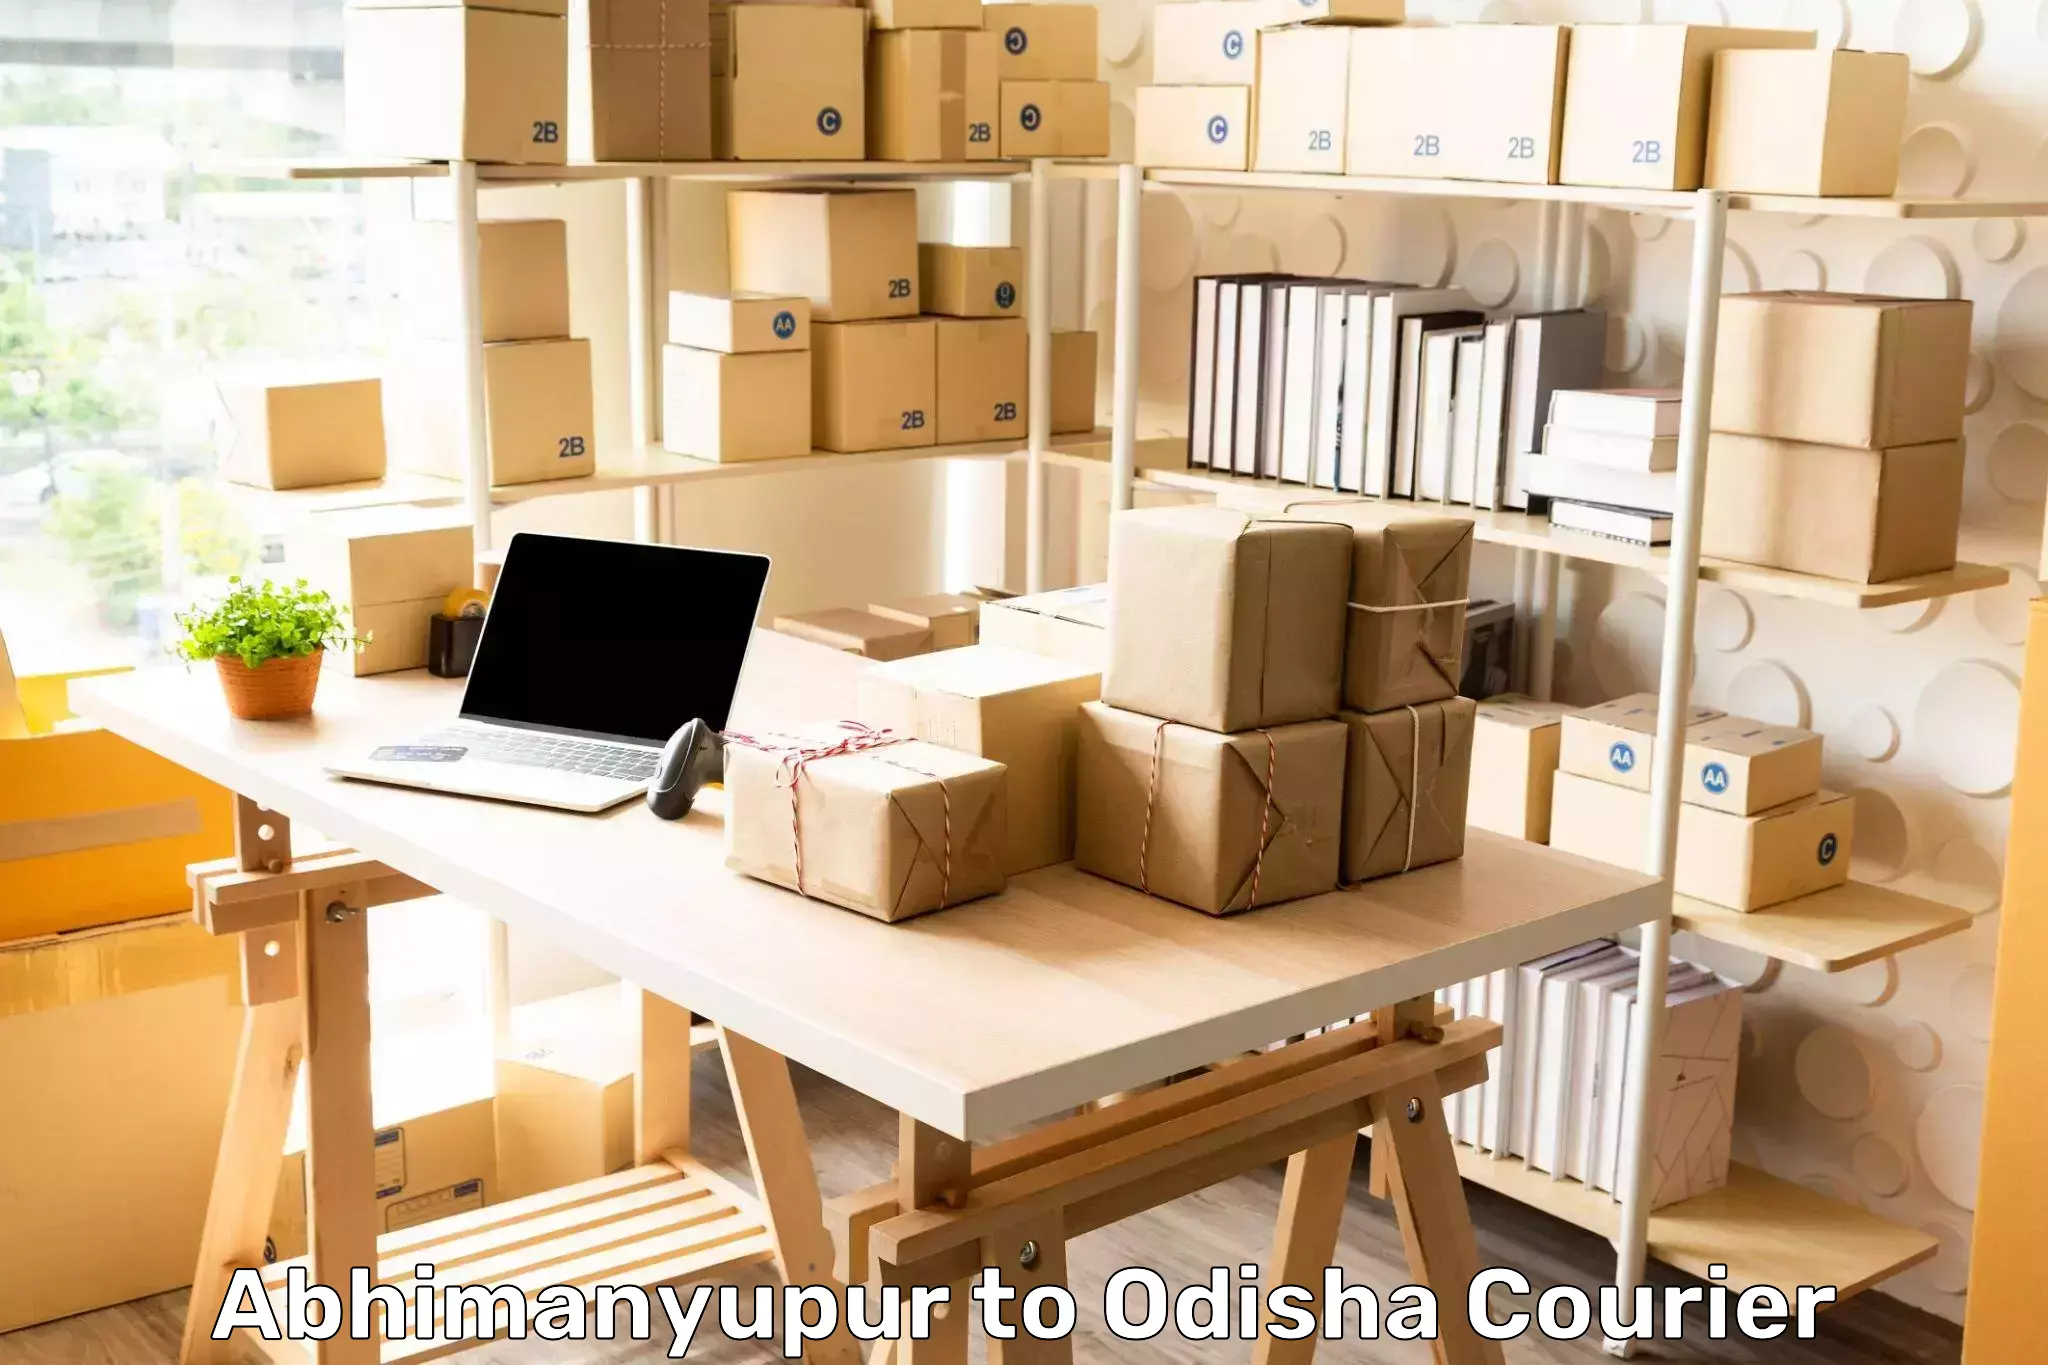 Large-scale shipping solutions Abhimanyupur to Baleswar